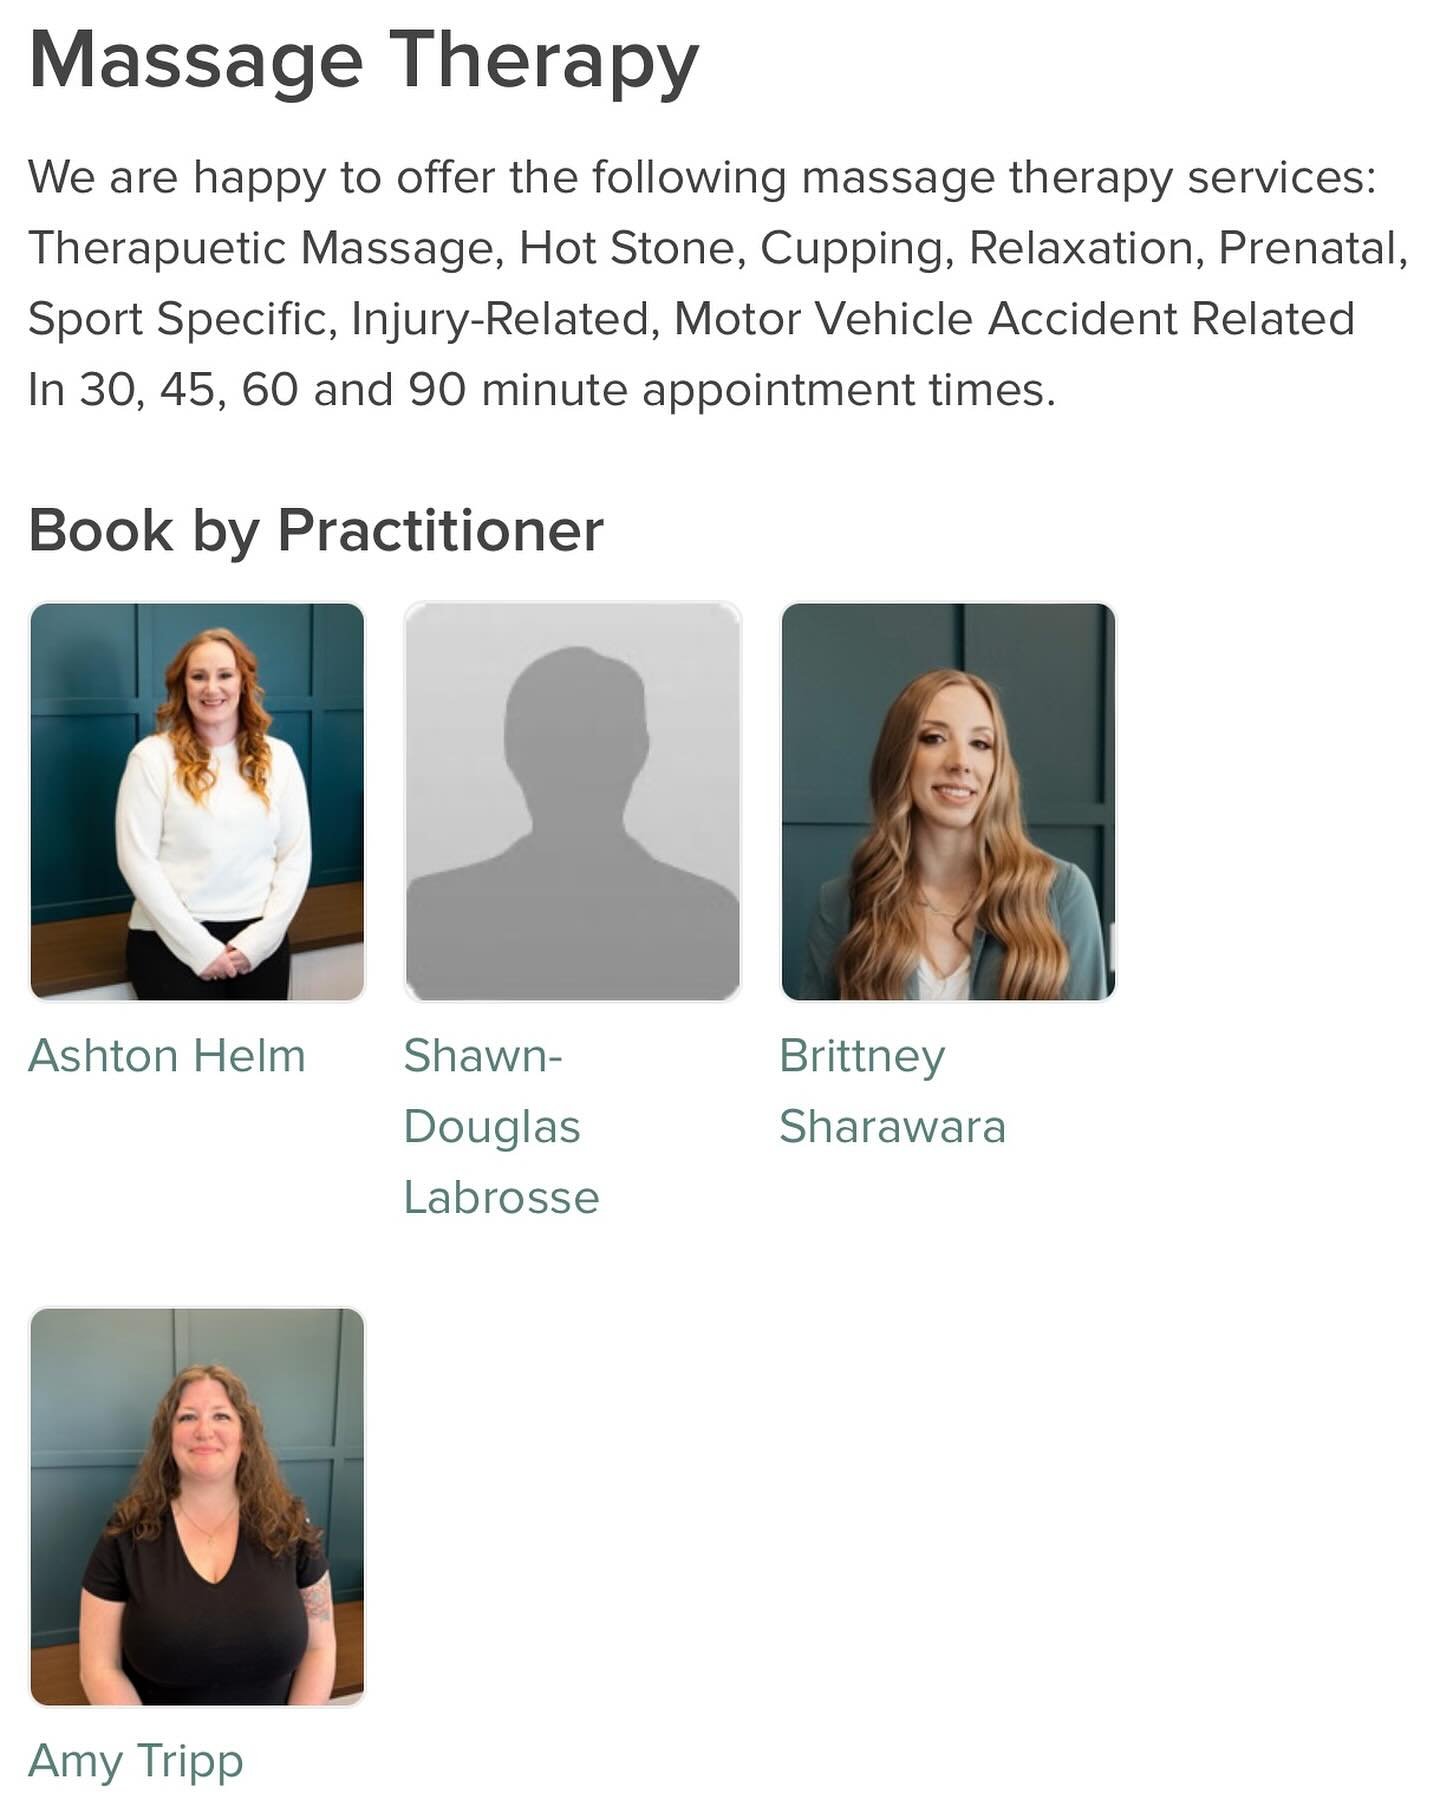 Photo and Bio are coming soon, but we couldn&rsquo;t wait to tell you that we have added another massage therapist to our team!! Schedule is open for Shawn Labrosse starting May 3rd, adding availability Wednesdays through Saturdays!